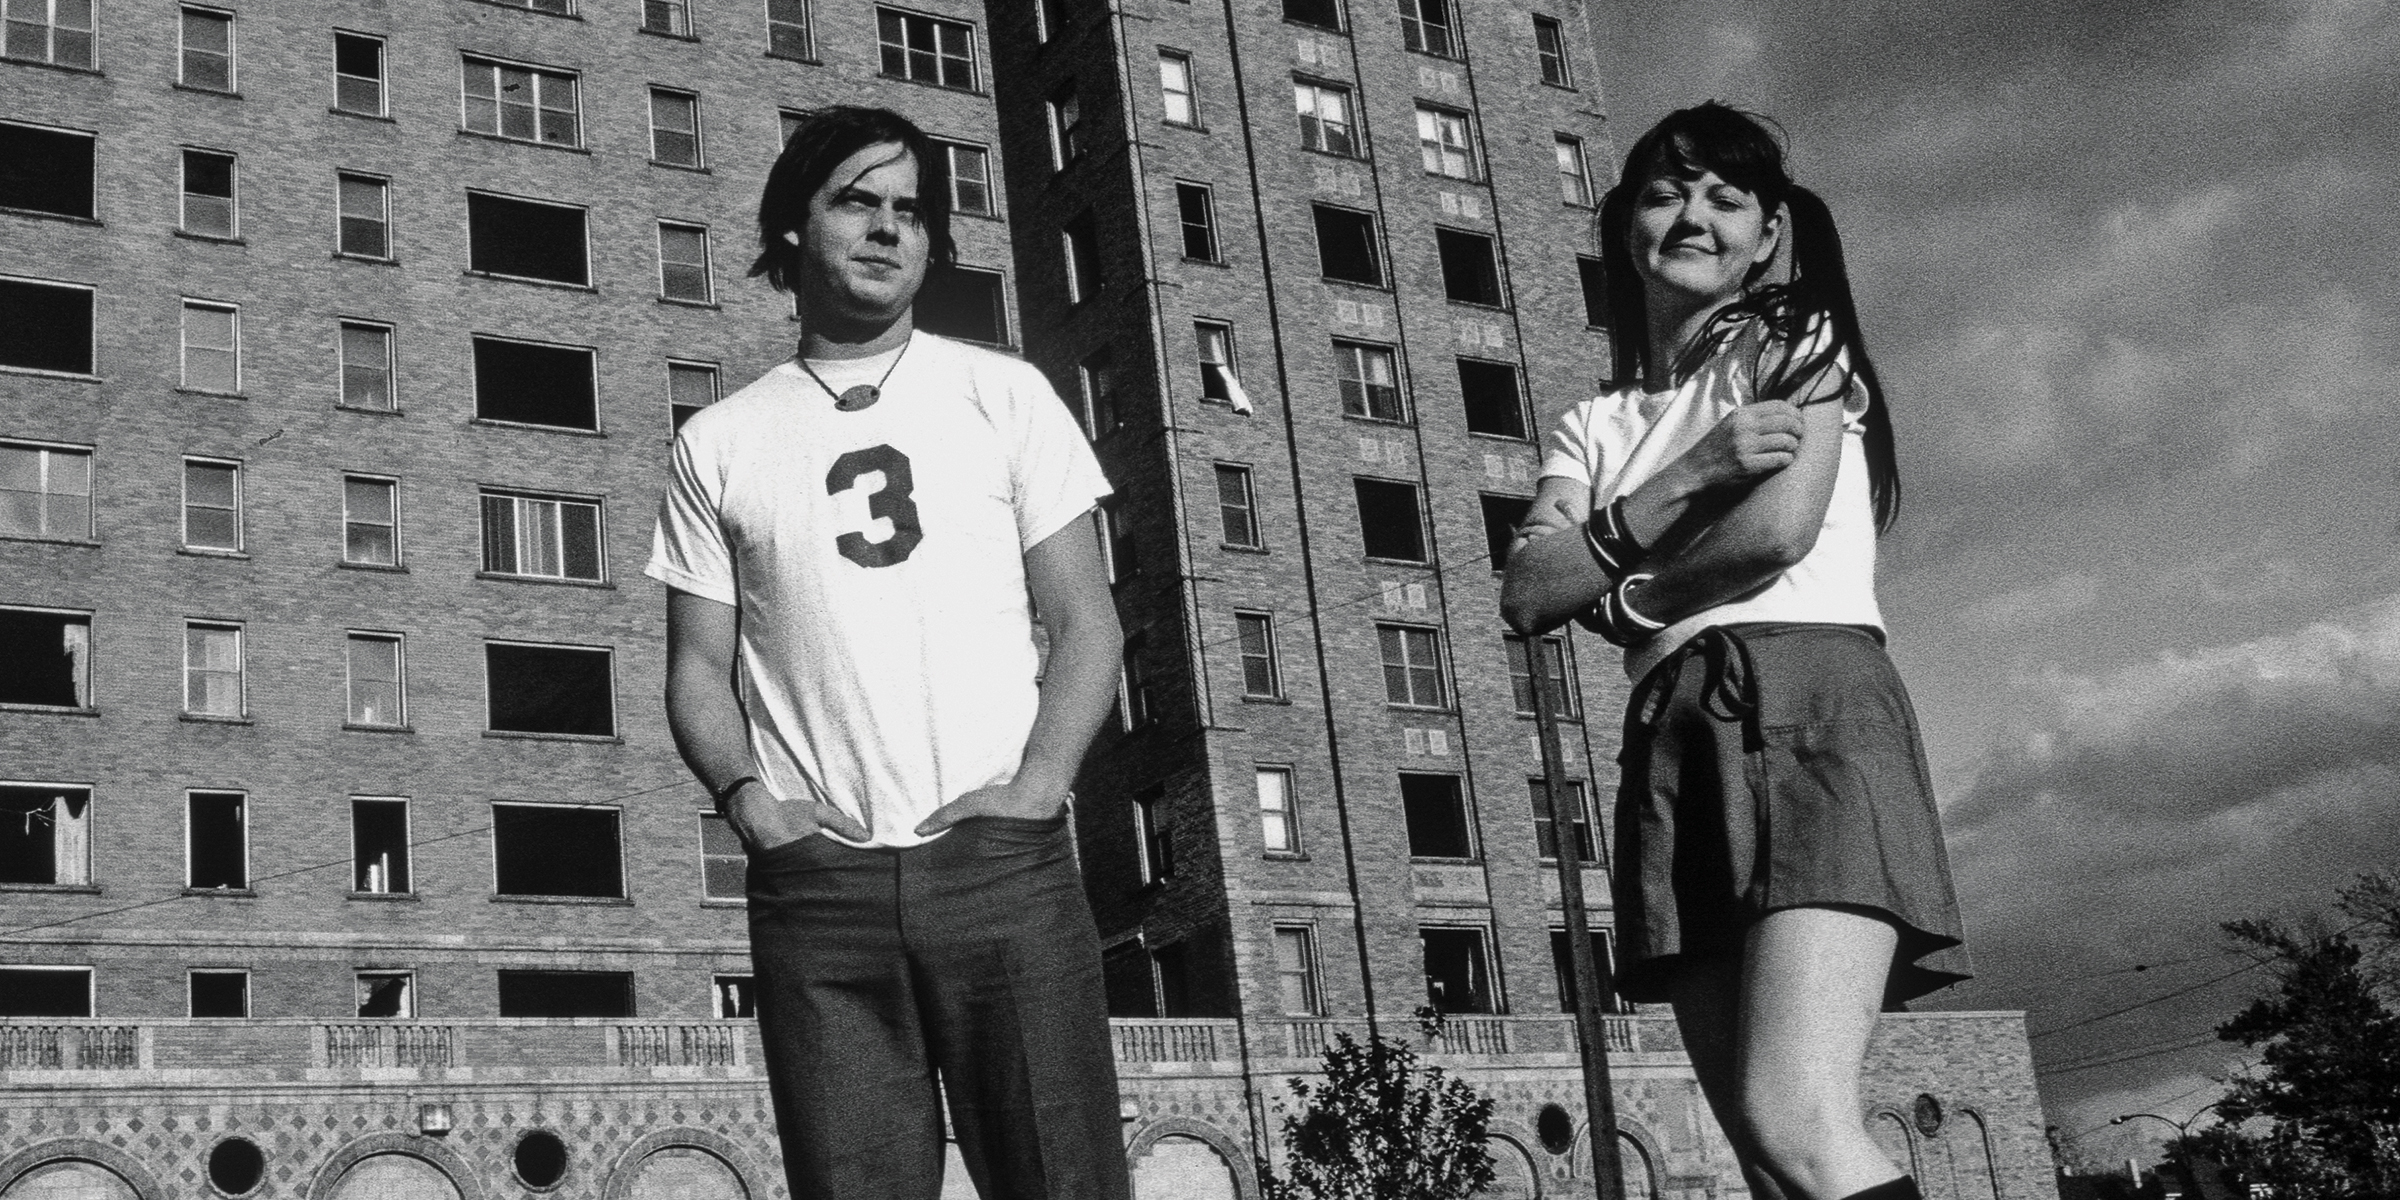 Can You Solve the Official White Stripes Crossword Puzzle?